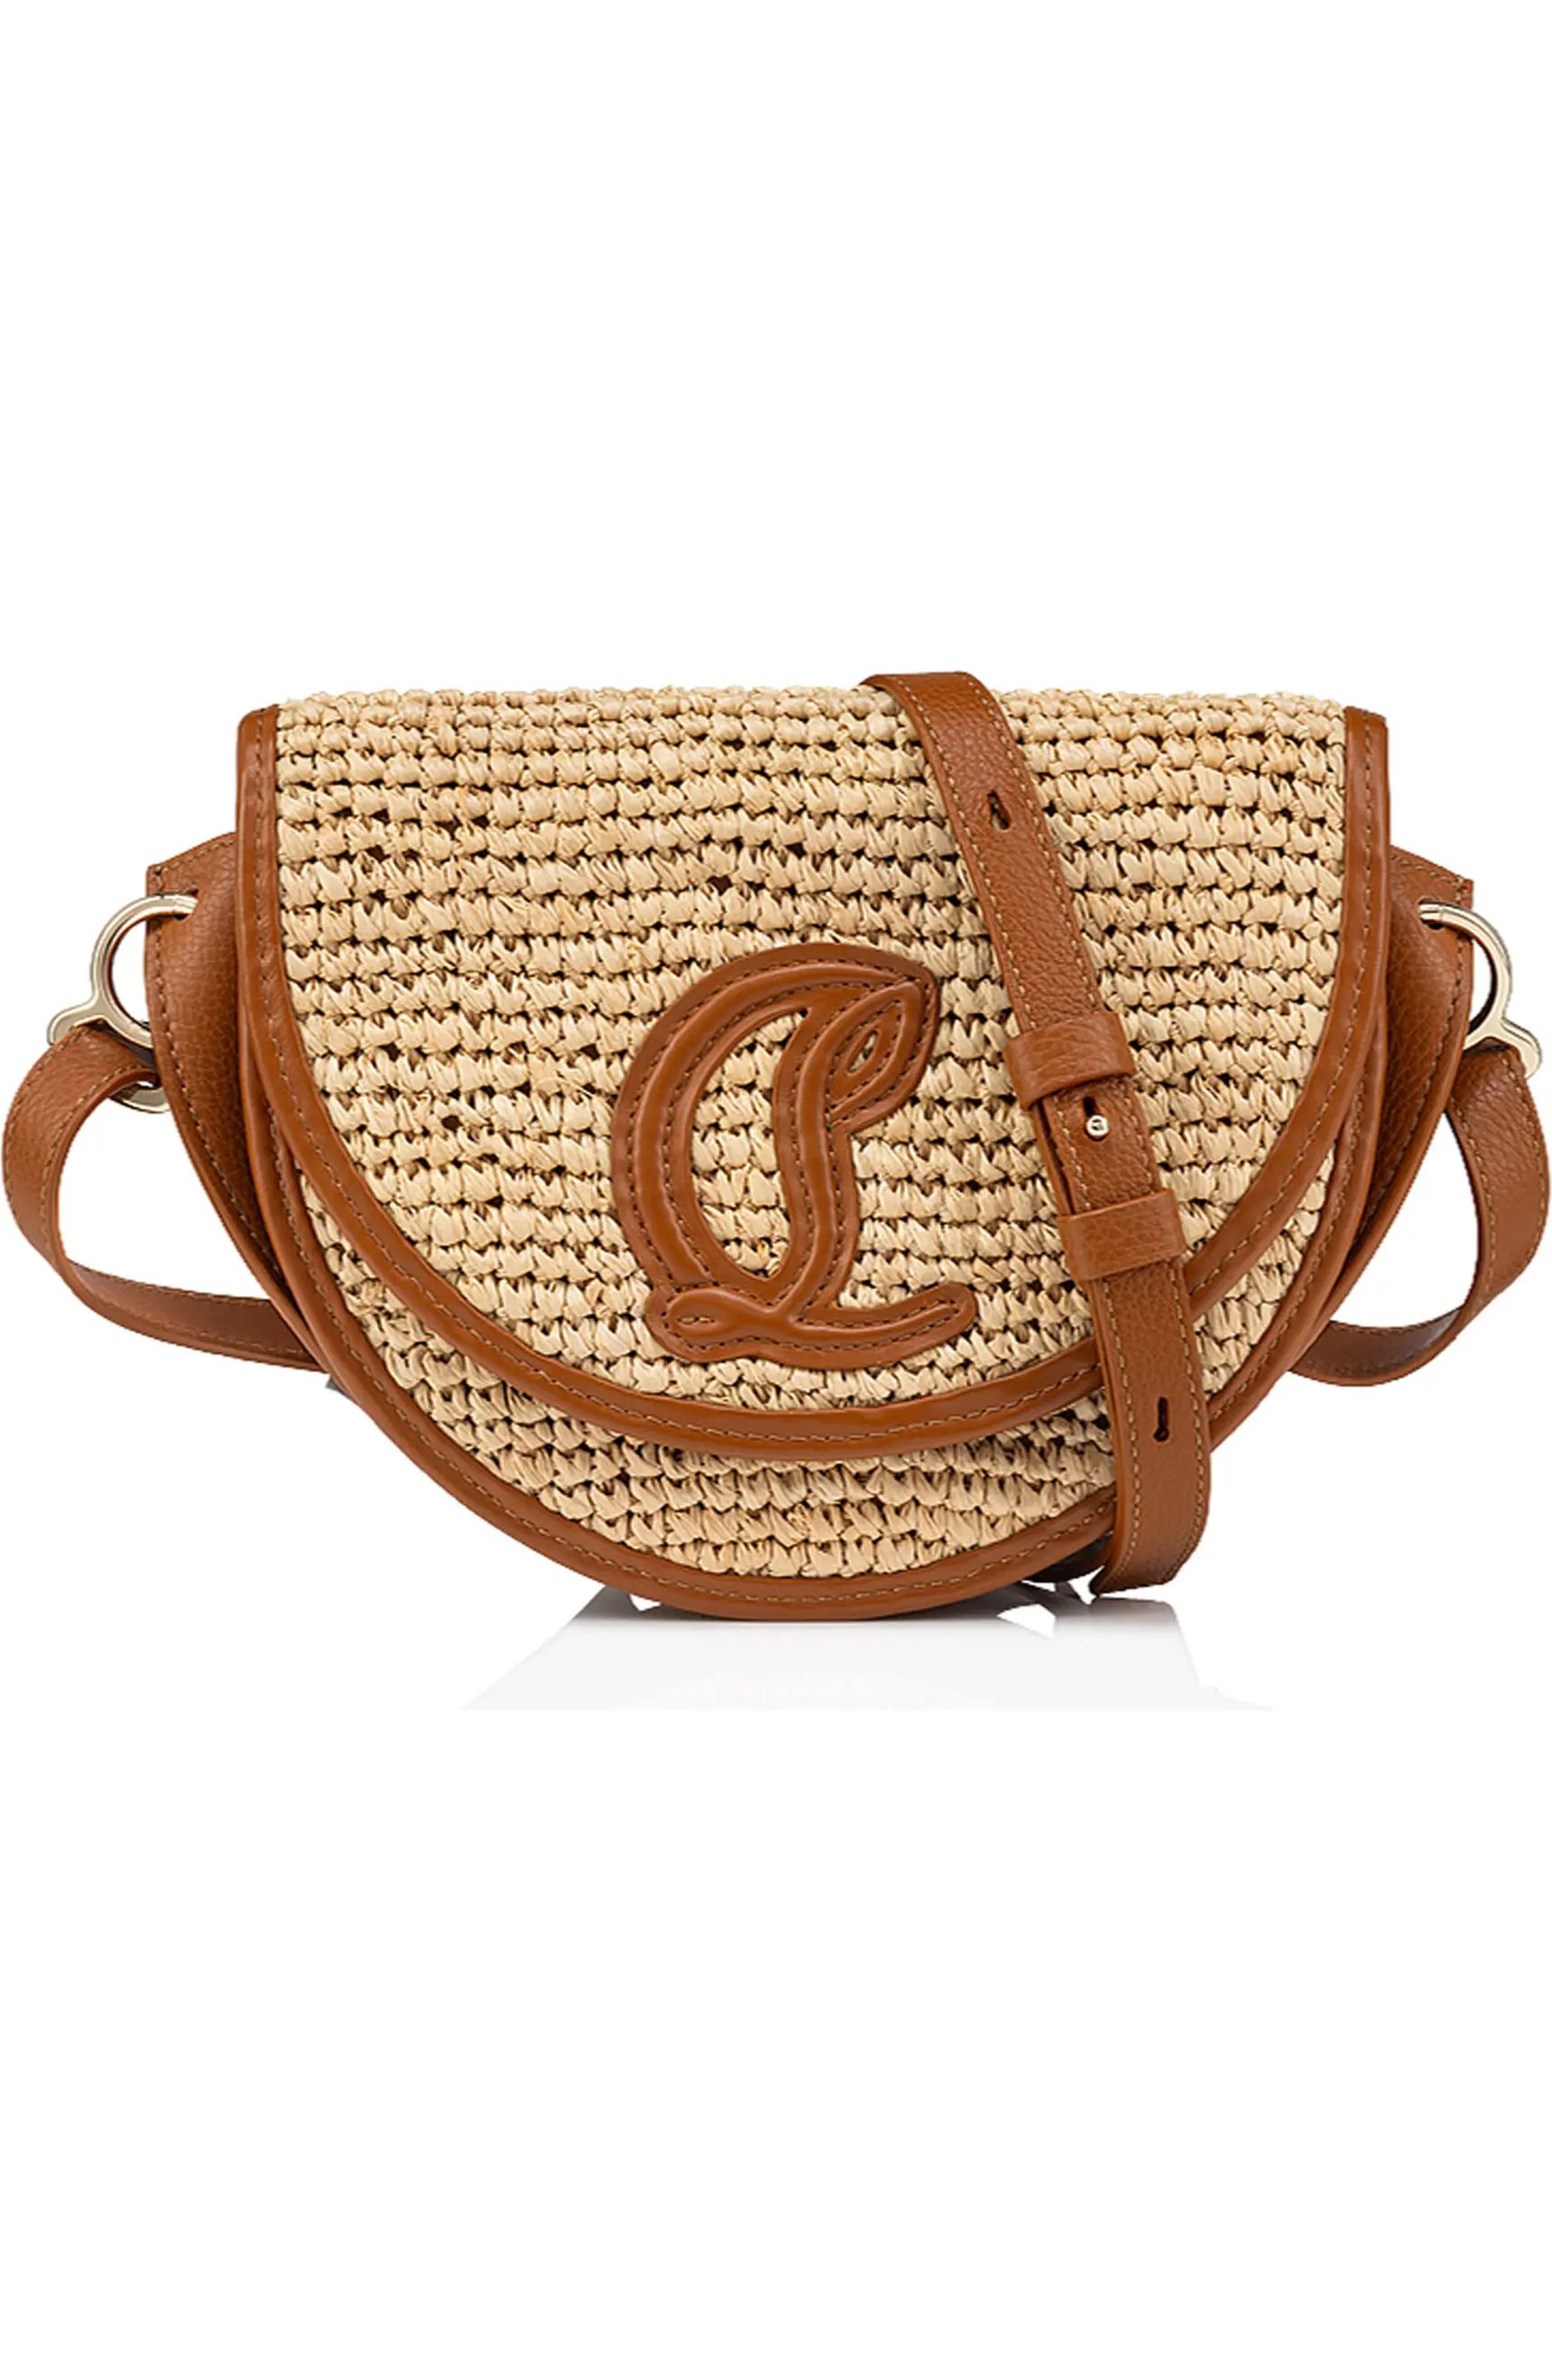 Christian Louboutin By My Side Raffia & Leather Crossbody Bag | Nordstrom | Nordstrom